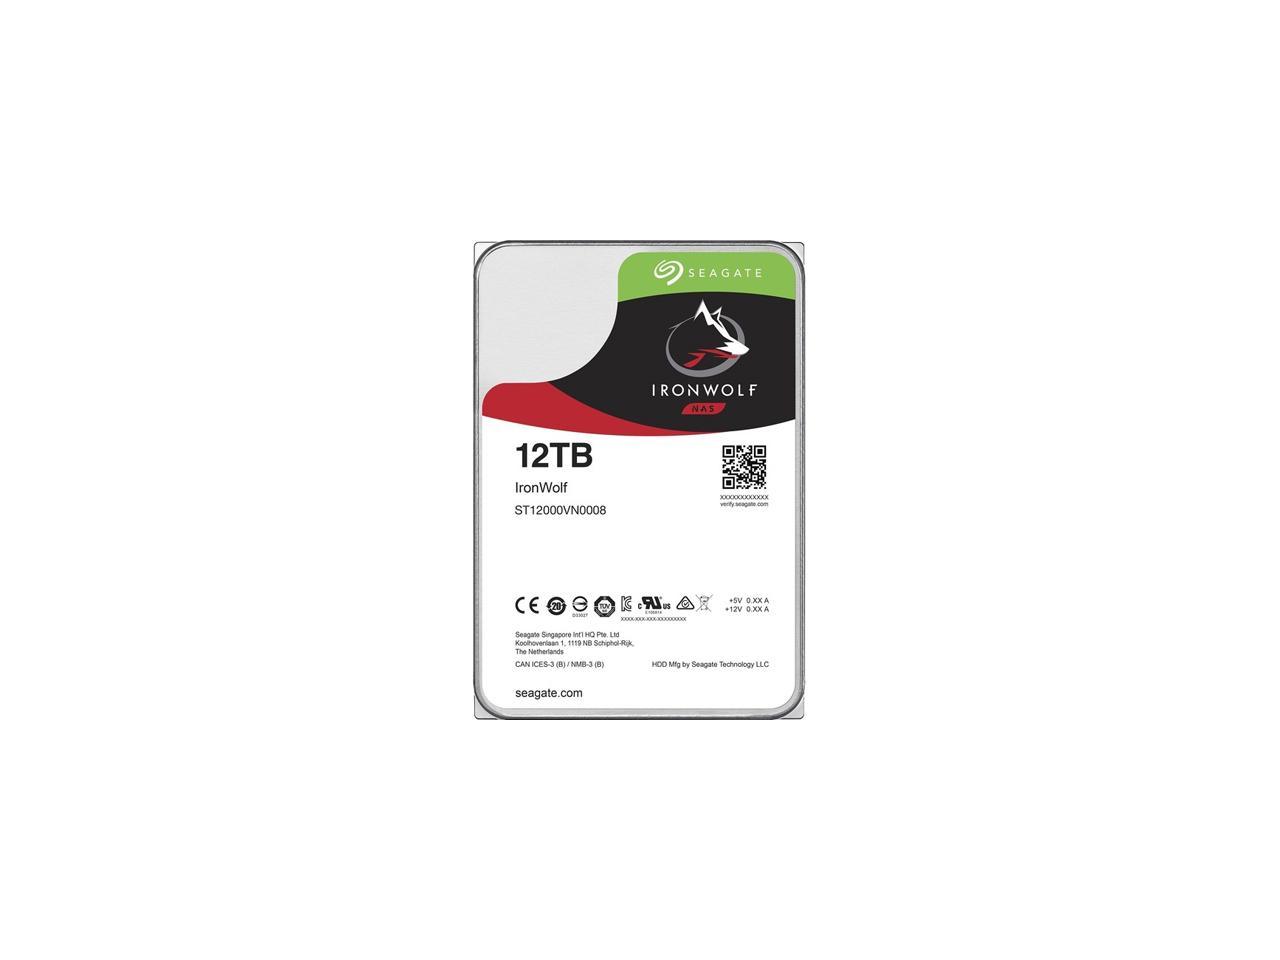 Seagate IronWolf 12TB NAS Hard Drive 7200 RPM 256MB Cache SATA 6.0Gb/s CMR 3.5" Internal HDD for RAID Network Attached Storage ST12000VN0008 - OEM $264.99